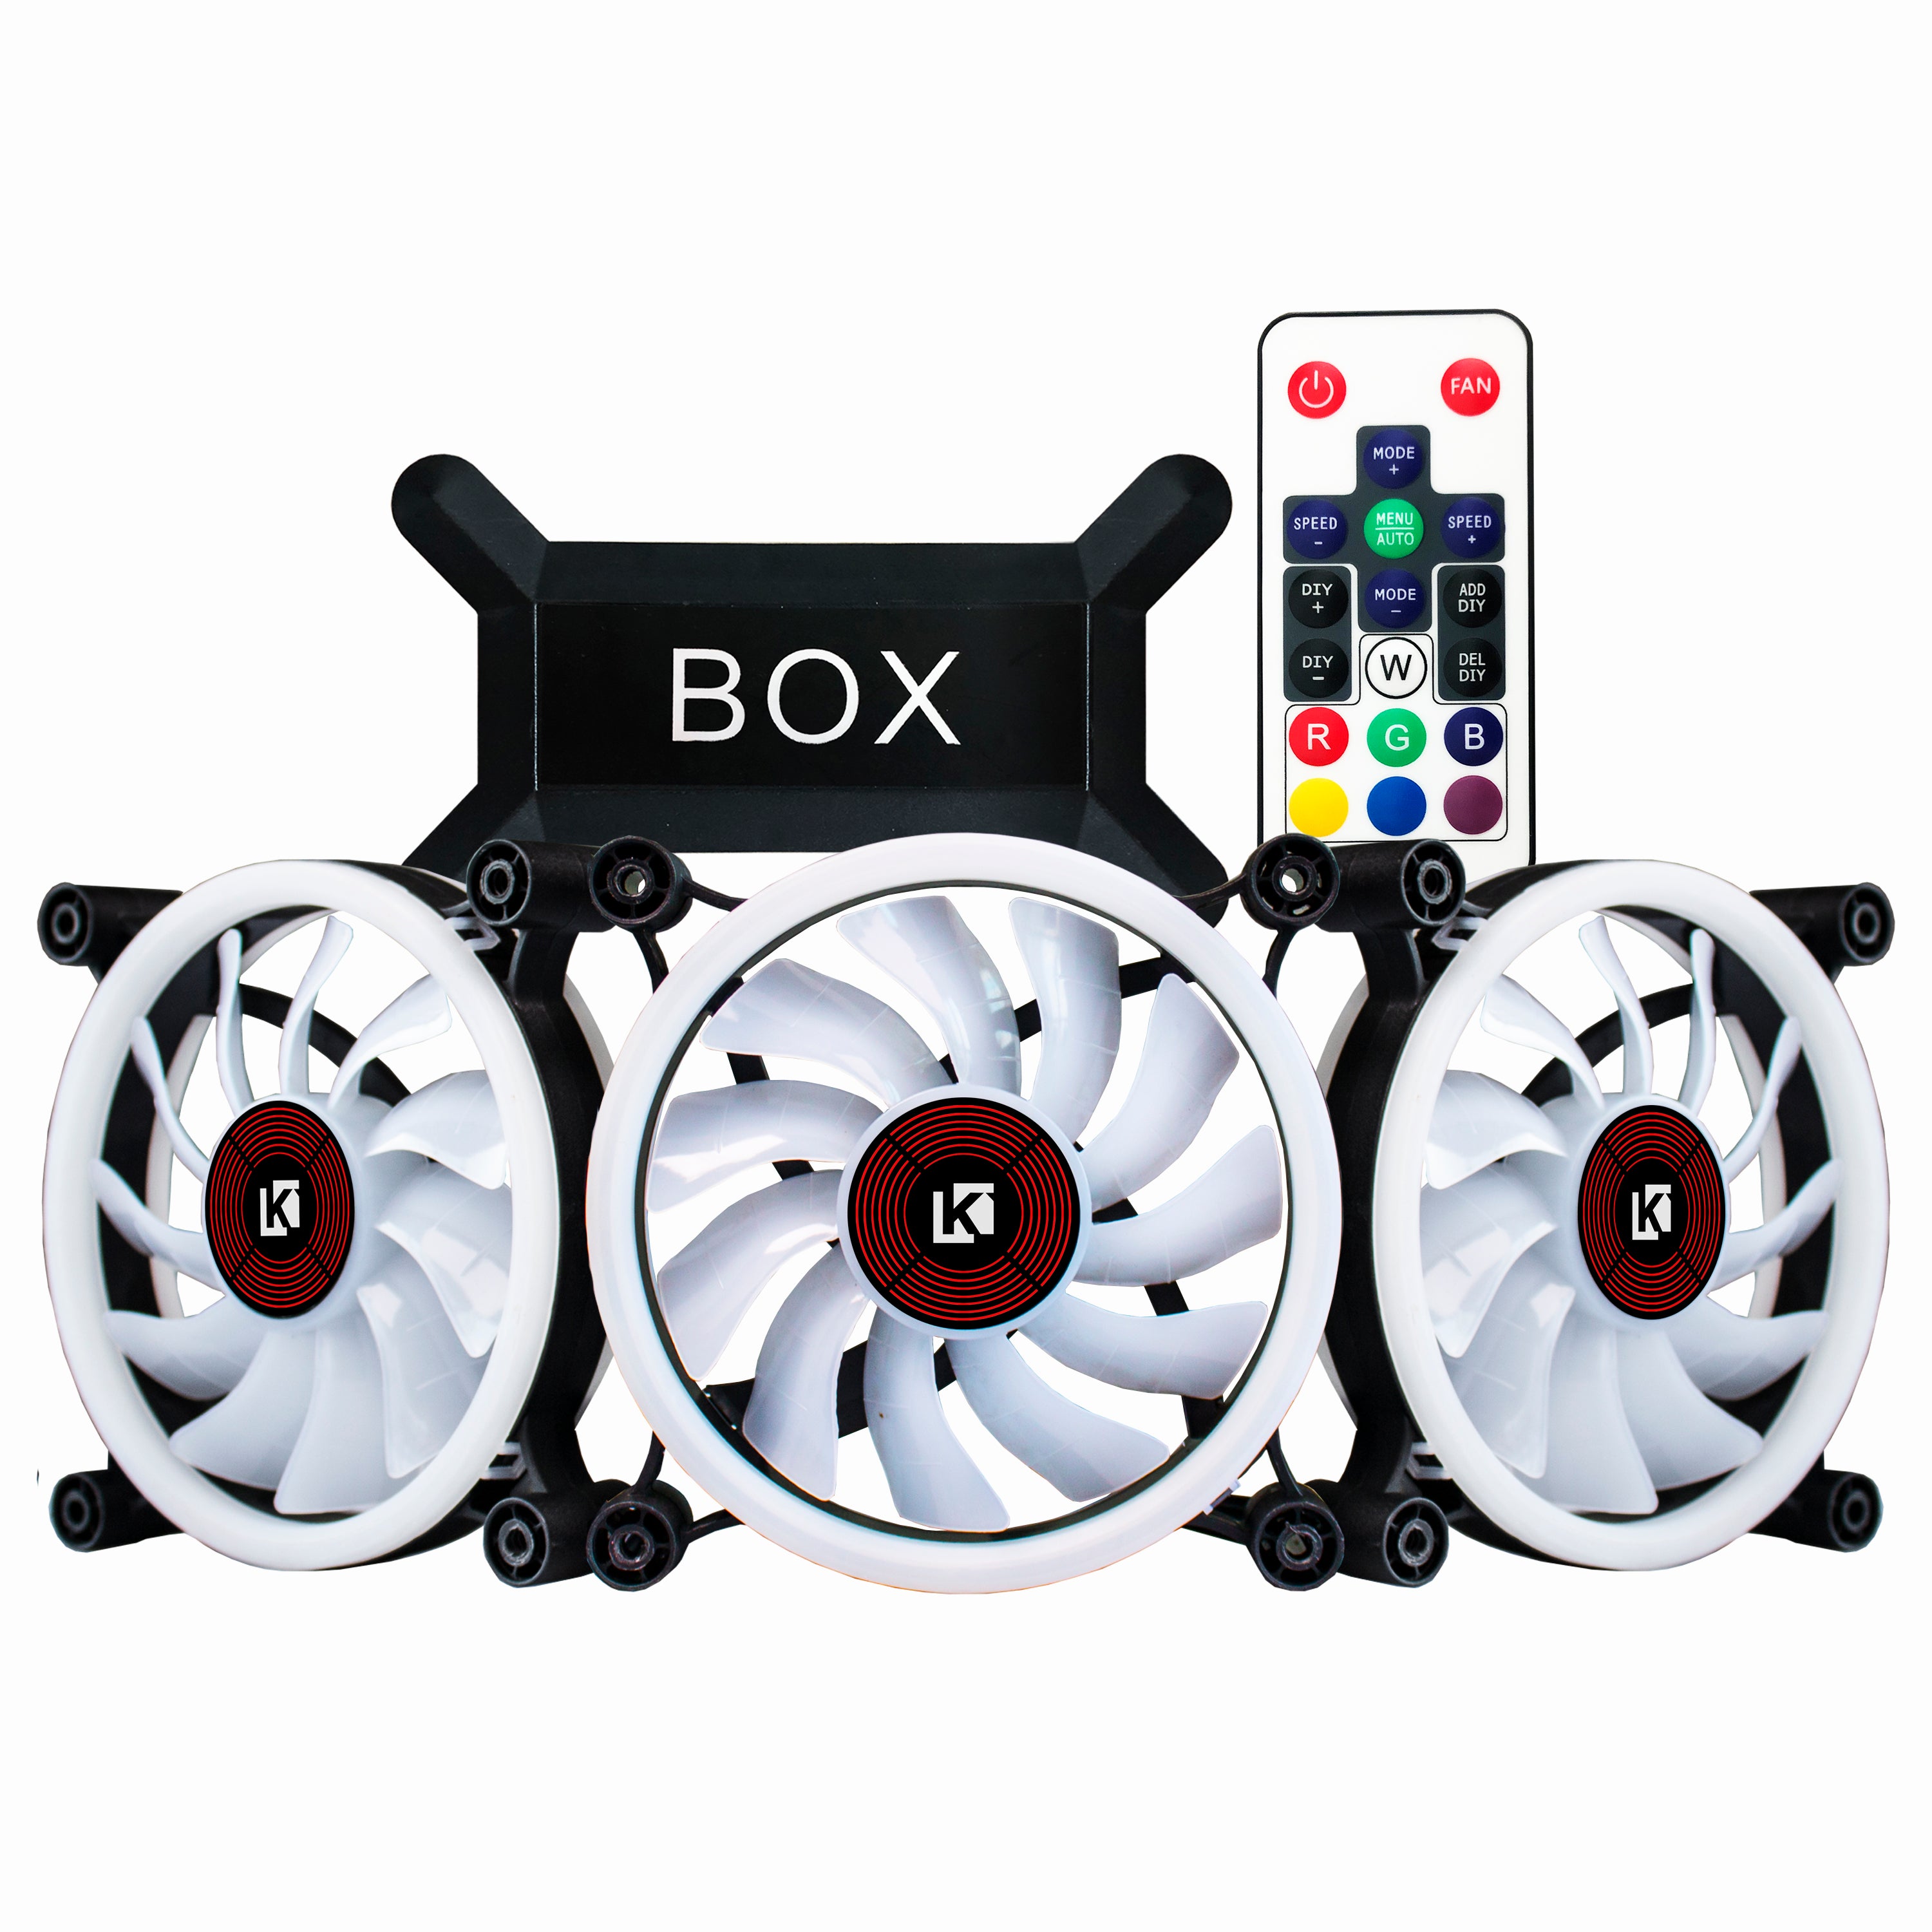 KEDIERS RGB Case Fans, 3 Pack 120mm Quiet Computer Cooling PC Fans, Music Rhythm 5V ARGB Addressable Motherboard SYNC/RC Controller, Colorful Cooler Speed Adjustable with Fan Control Hub